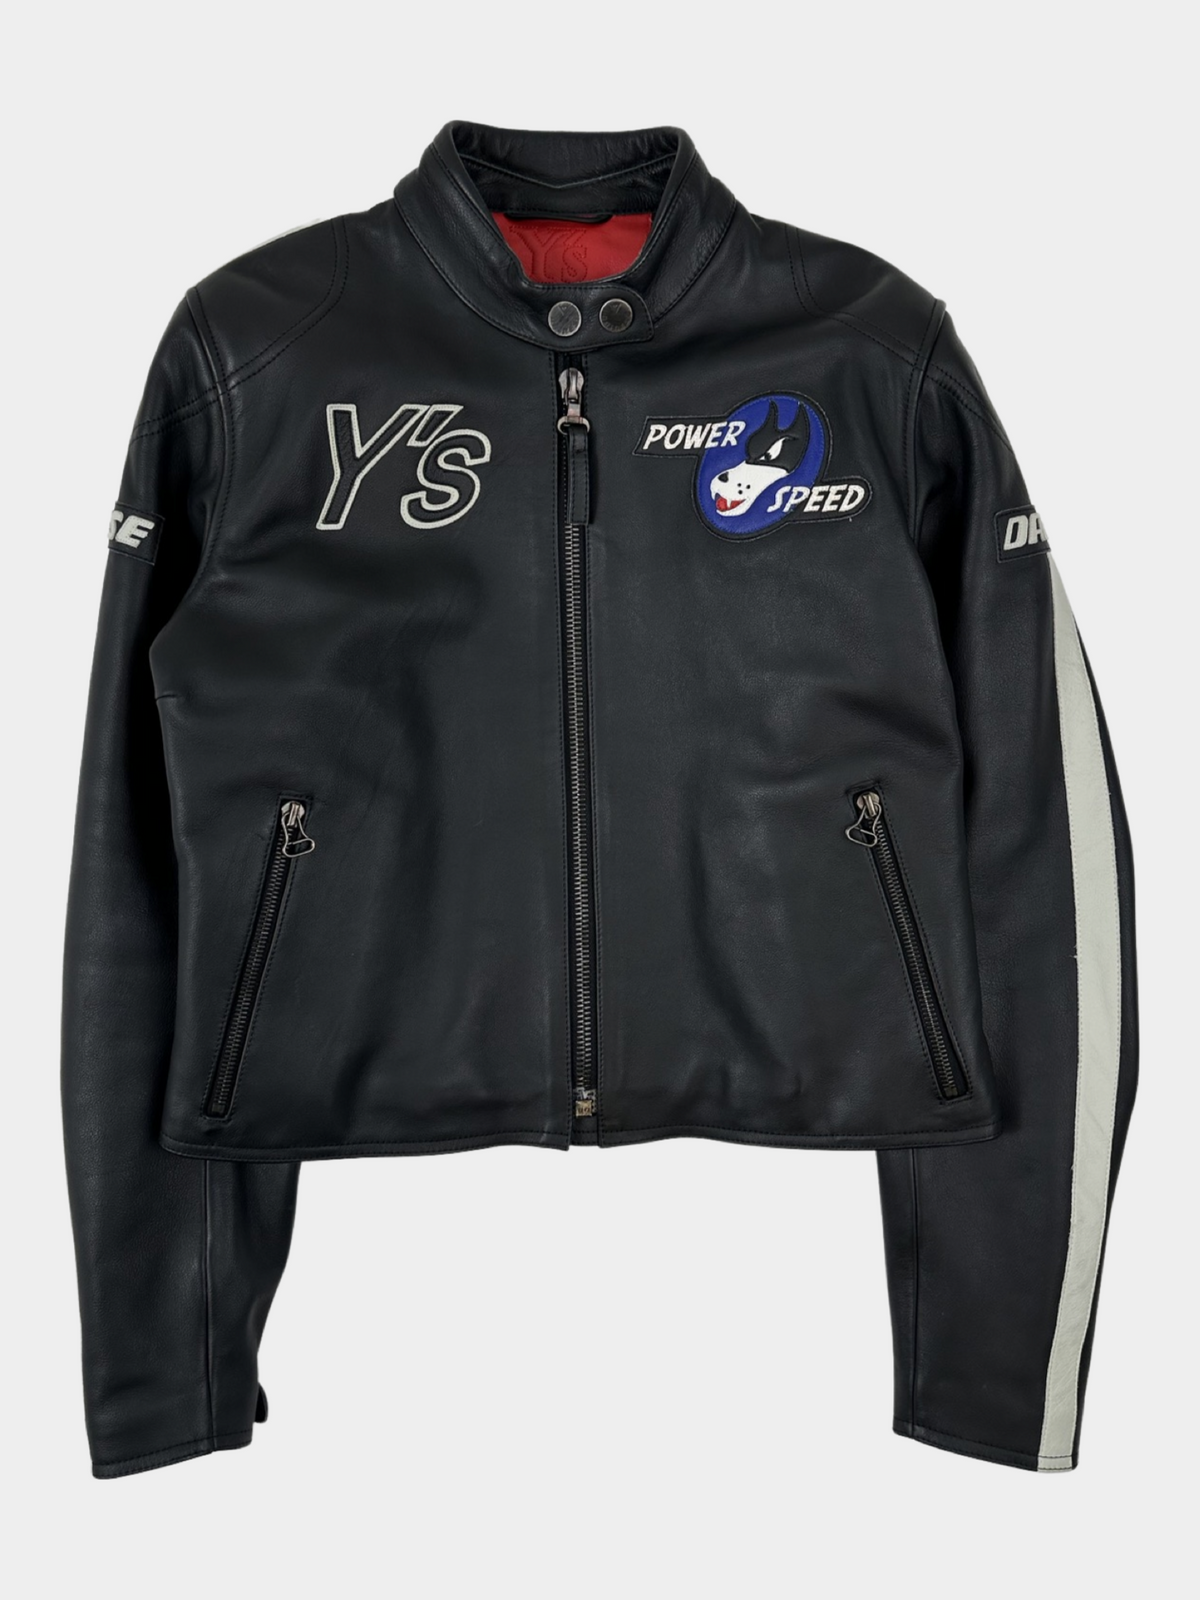 YOHJI YAMAMOTO Pour Homme Dainese Rider Jacket AW2004 - ARCHIVED